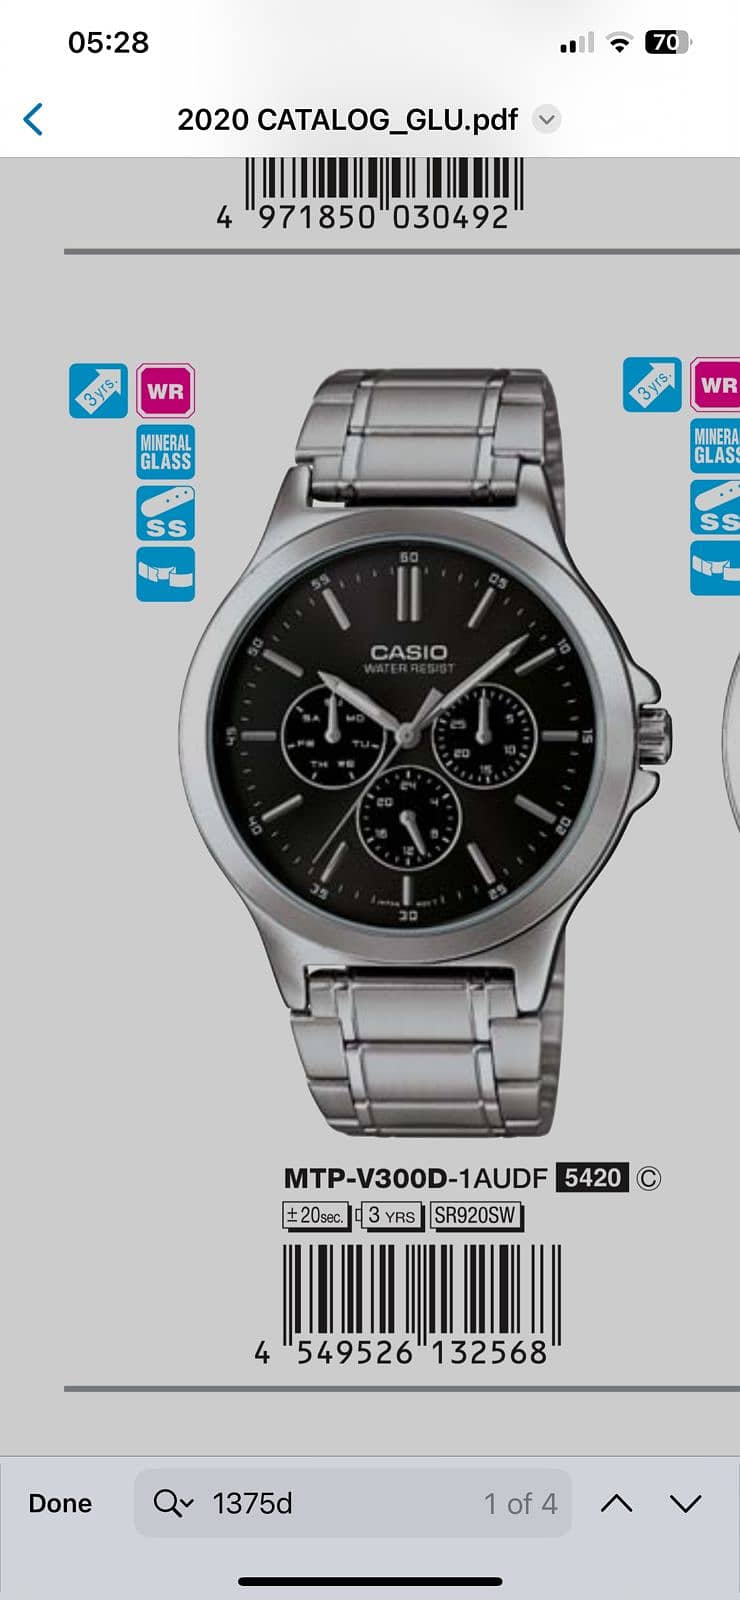 Casio watches on discounted prices 4